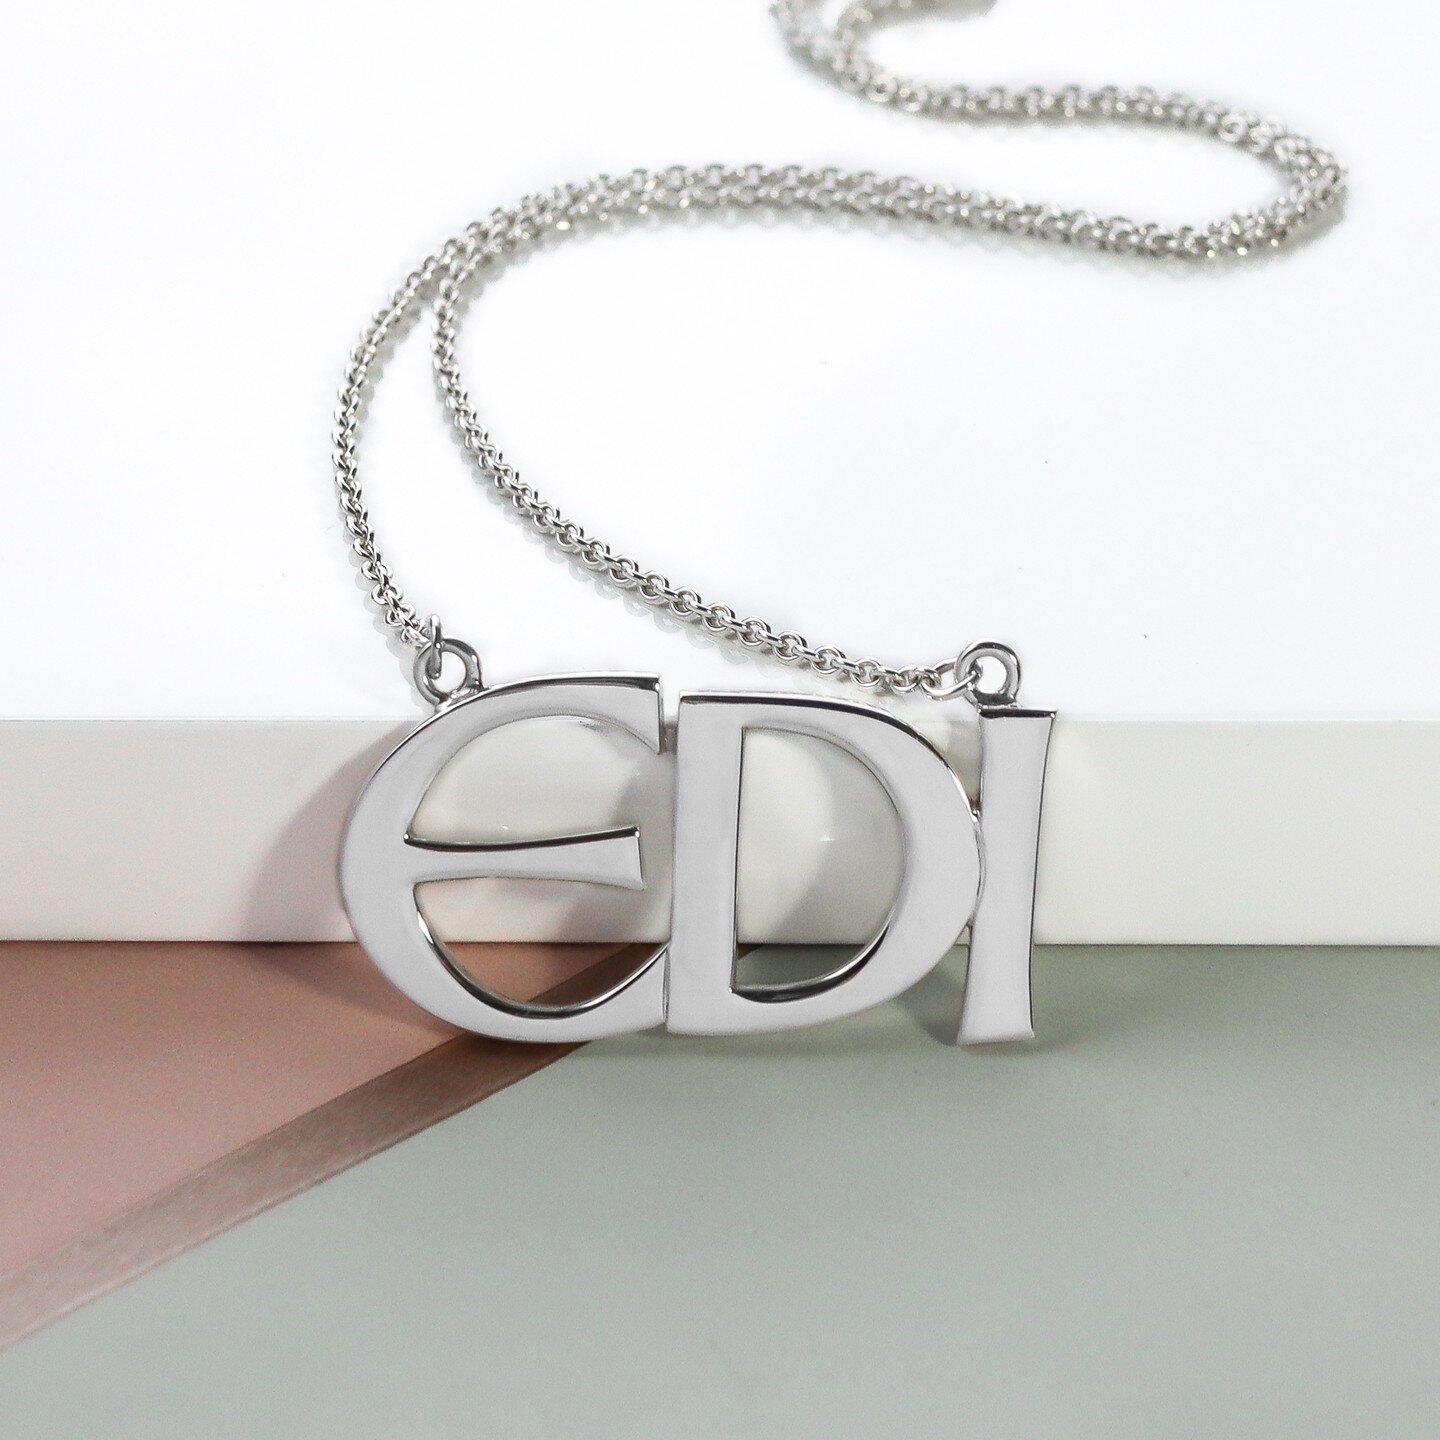 Now that the Christmas chaos is over, I can share some of the custom pieces I made!  First up, this name necklace for a lovely customer who lives in the USA, but wanted something to remember her beloved Edinburgh. The code for Edinburgh airport is ED